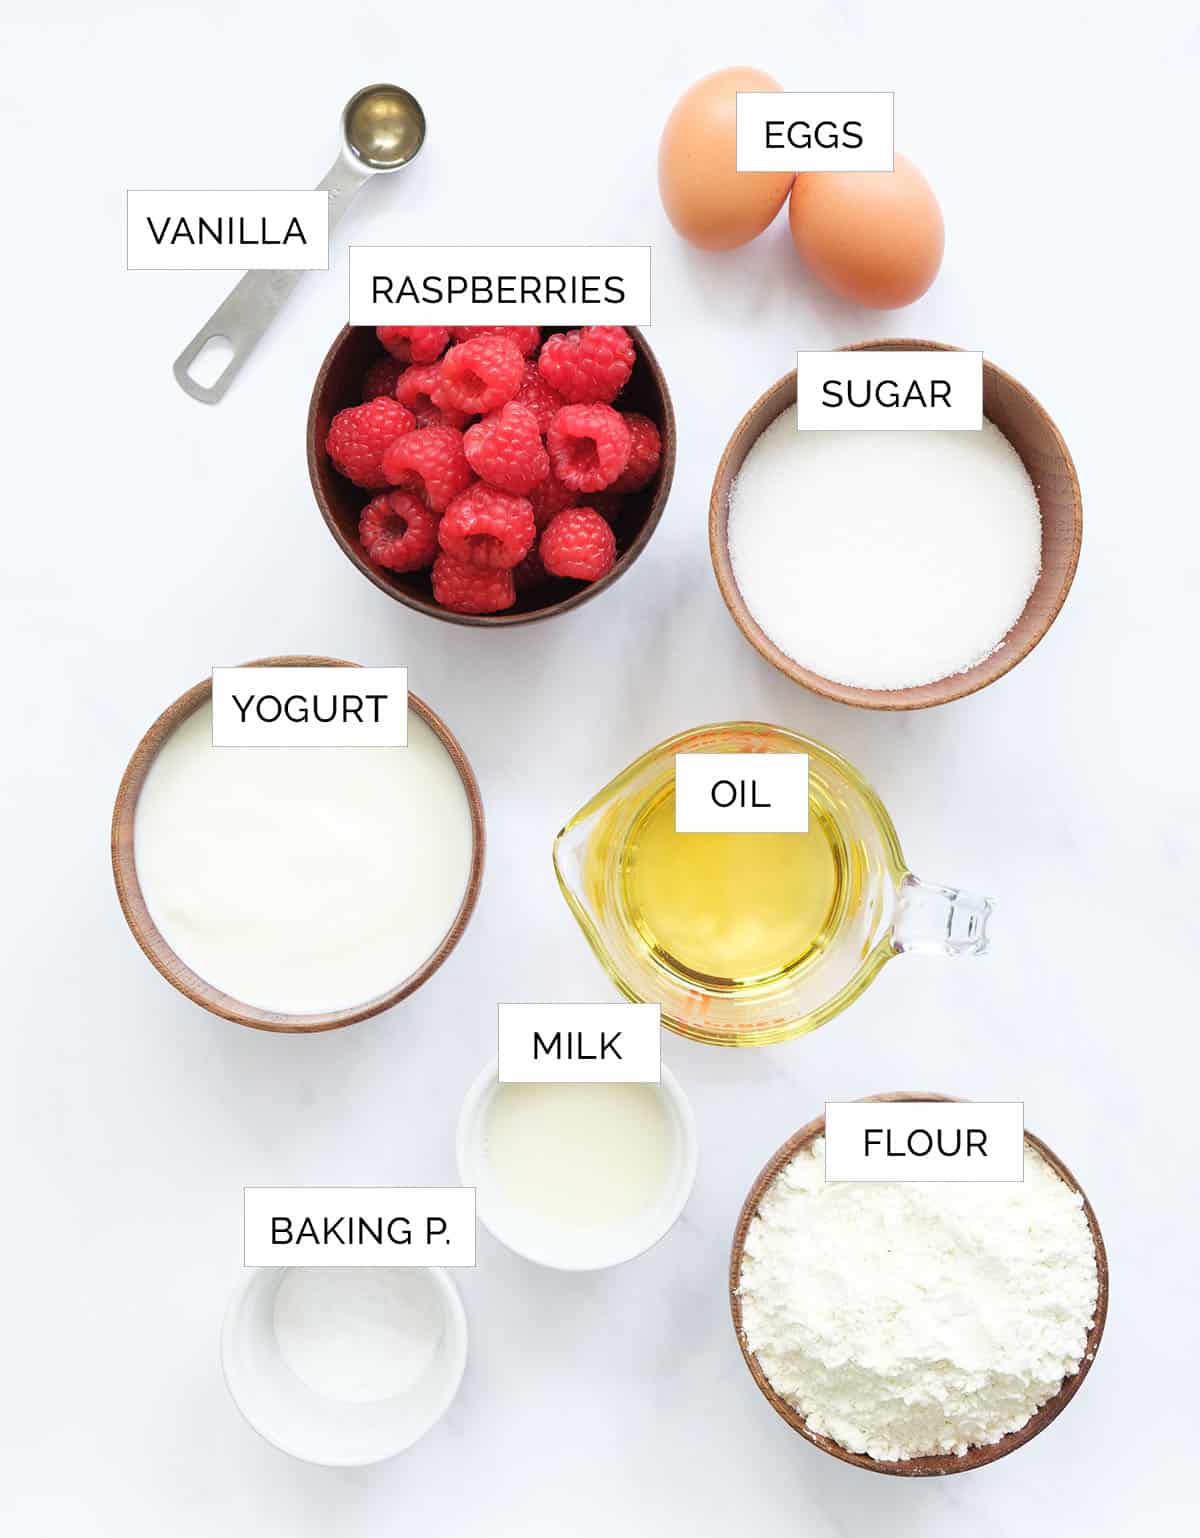 Top view of the ingredients to make raspberry muffins arranged over a white background.